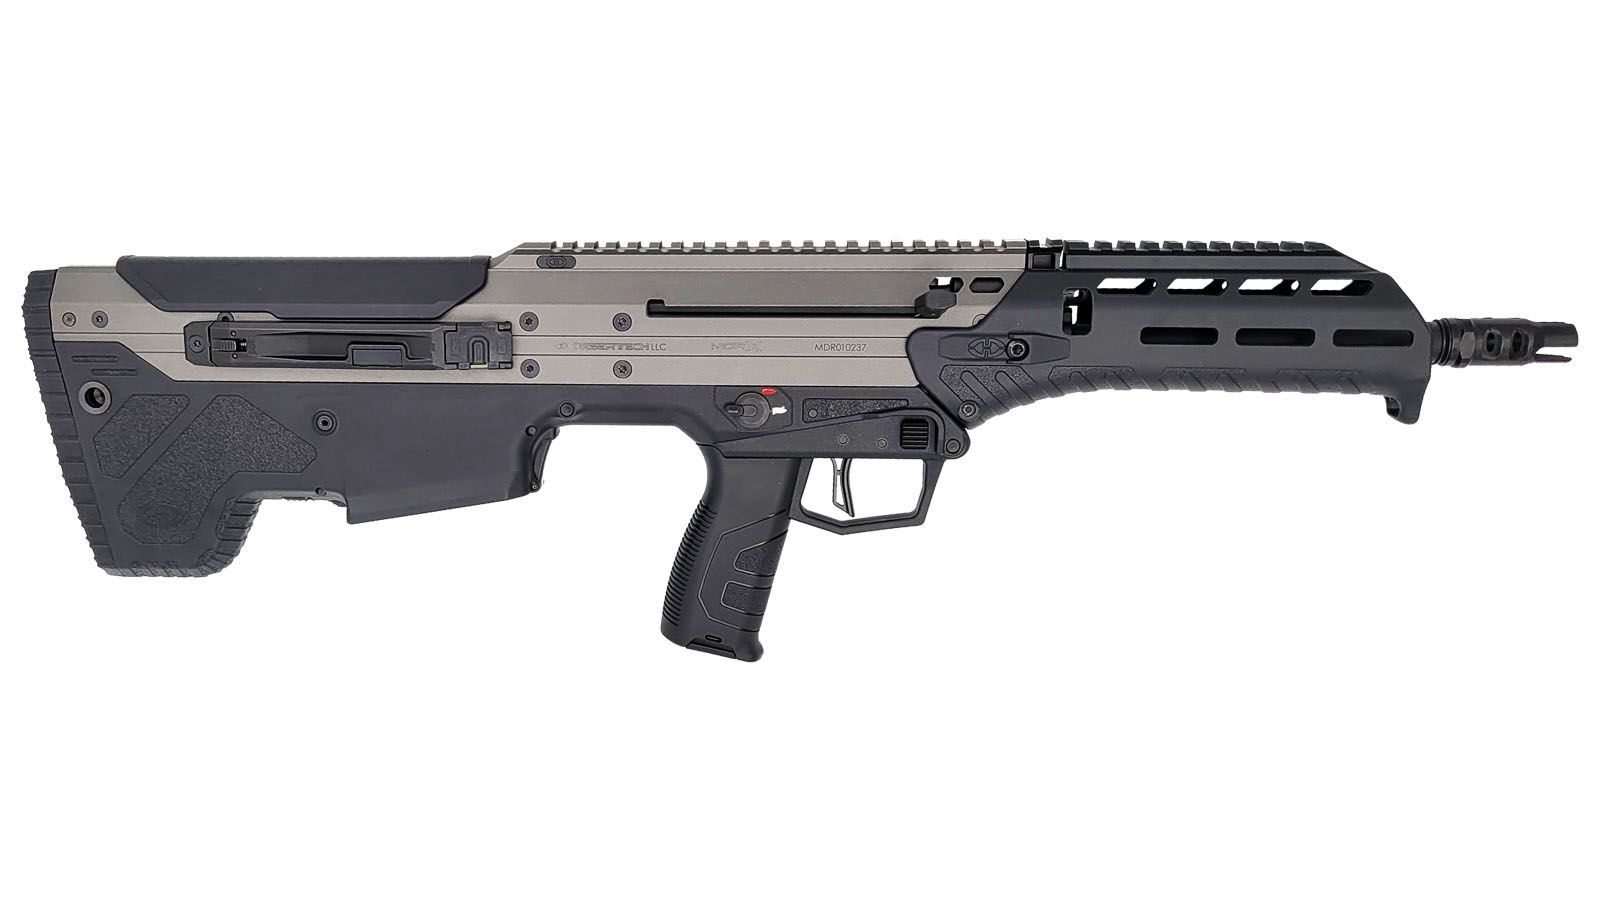 MDRx Rifle, 762NATO 308Win 16" 20rd Forward-Ejection Tungsten